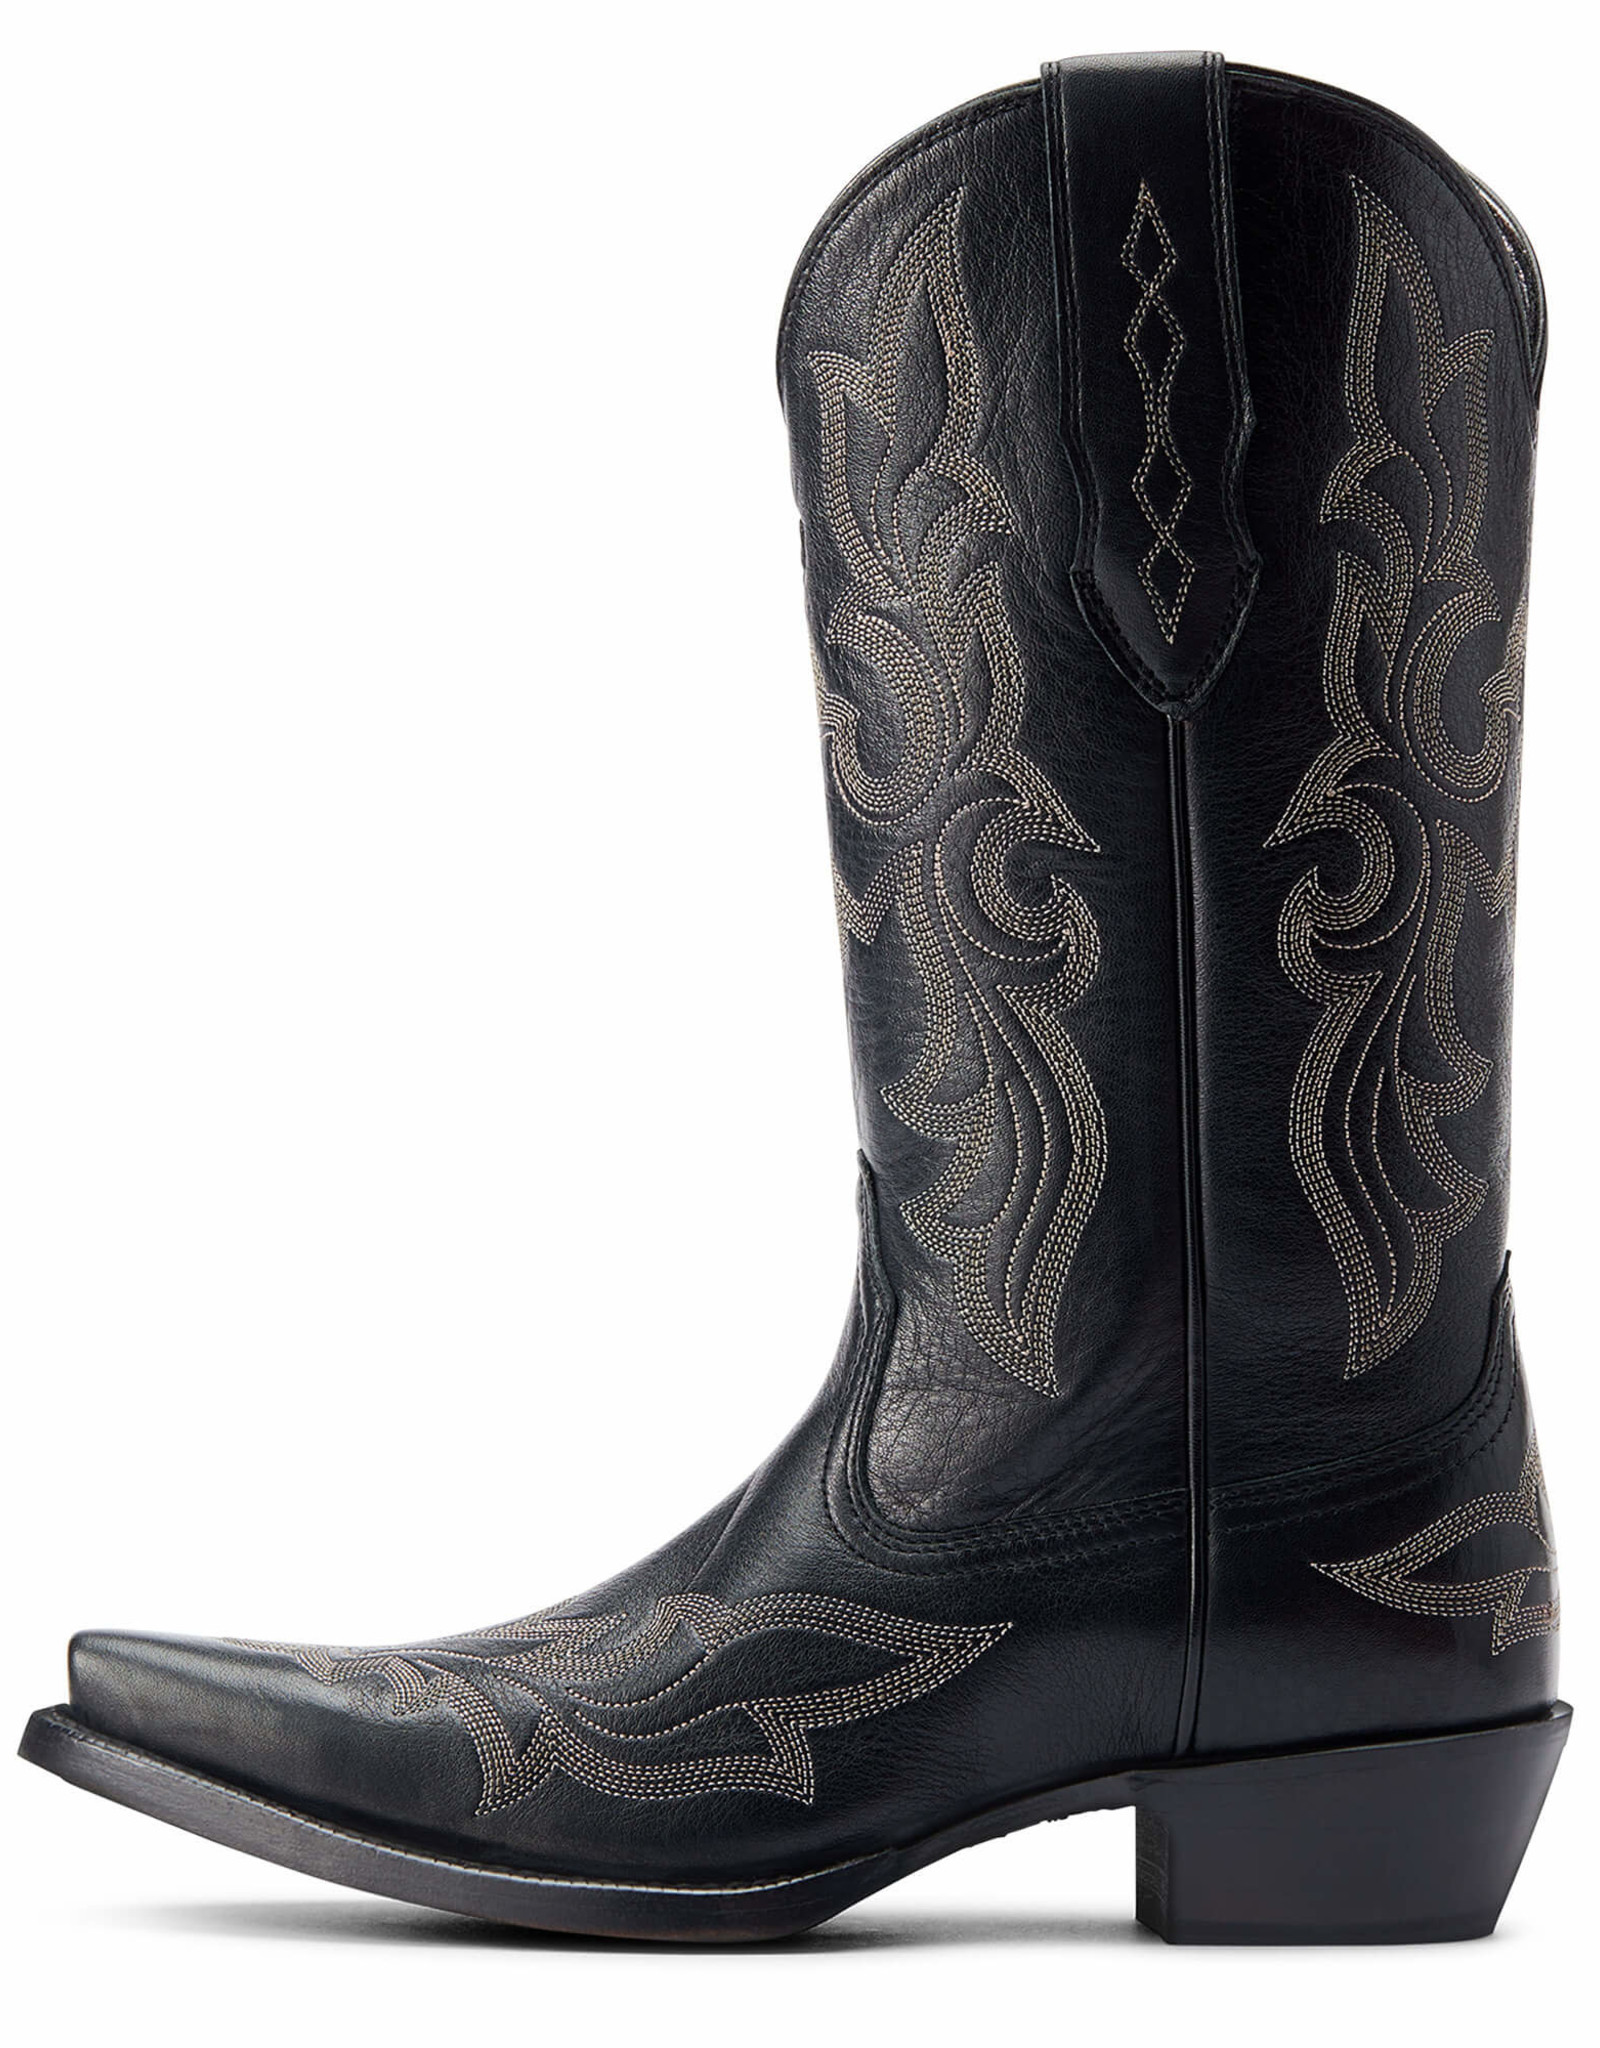 Ariat Womens Ariat Jennings Black Snip Toe Stretch Fit Western Cowboy Boot